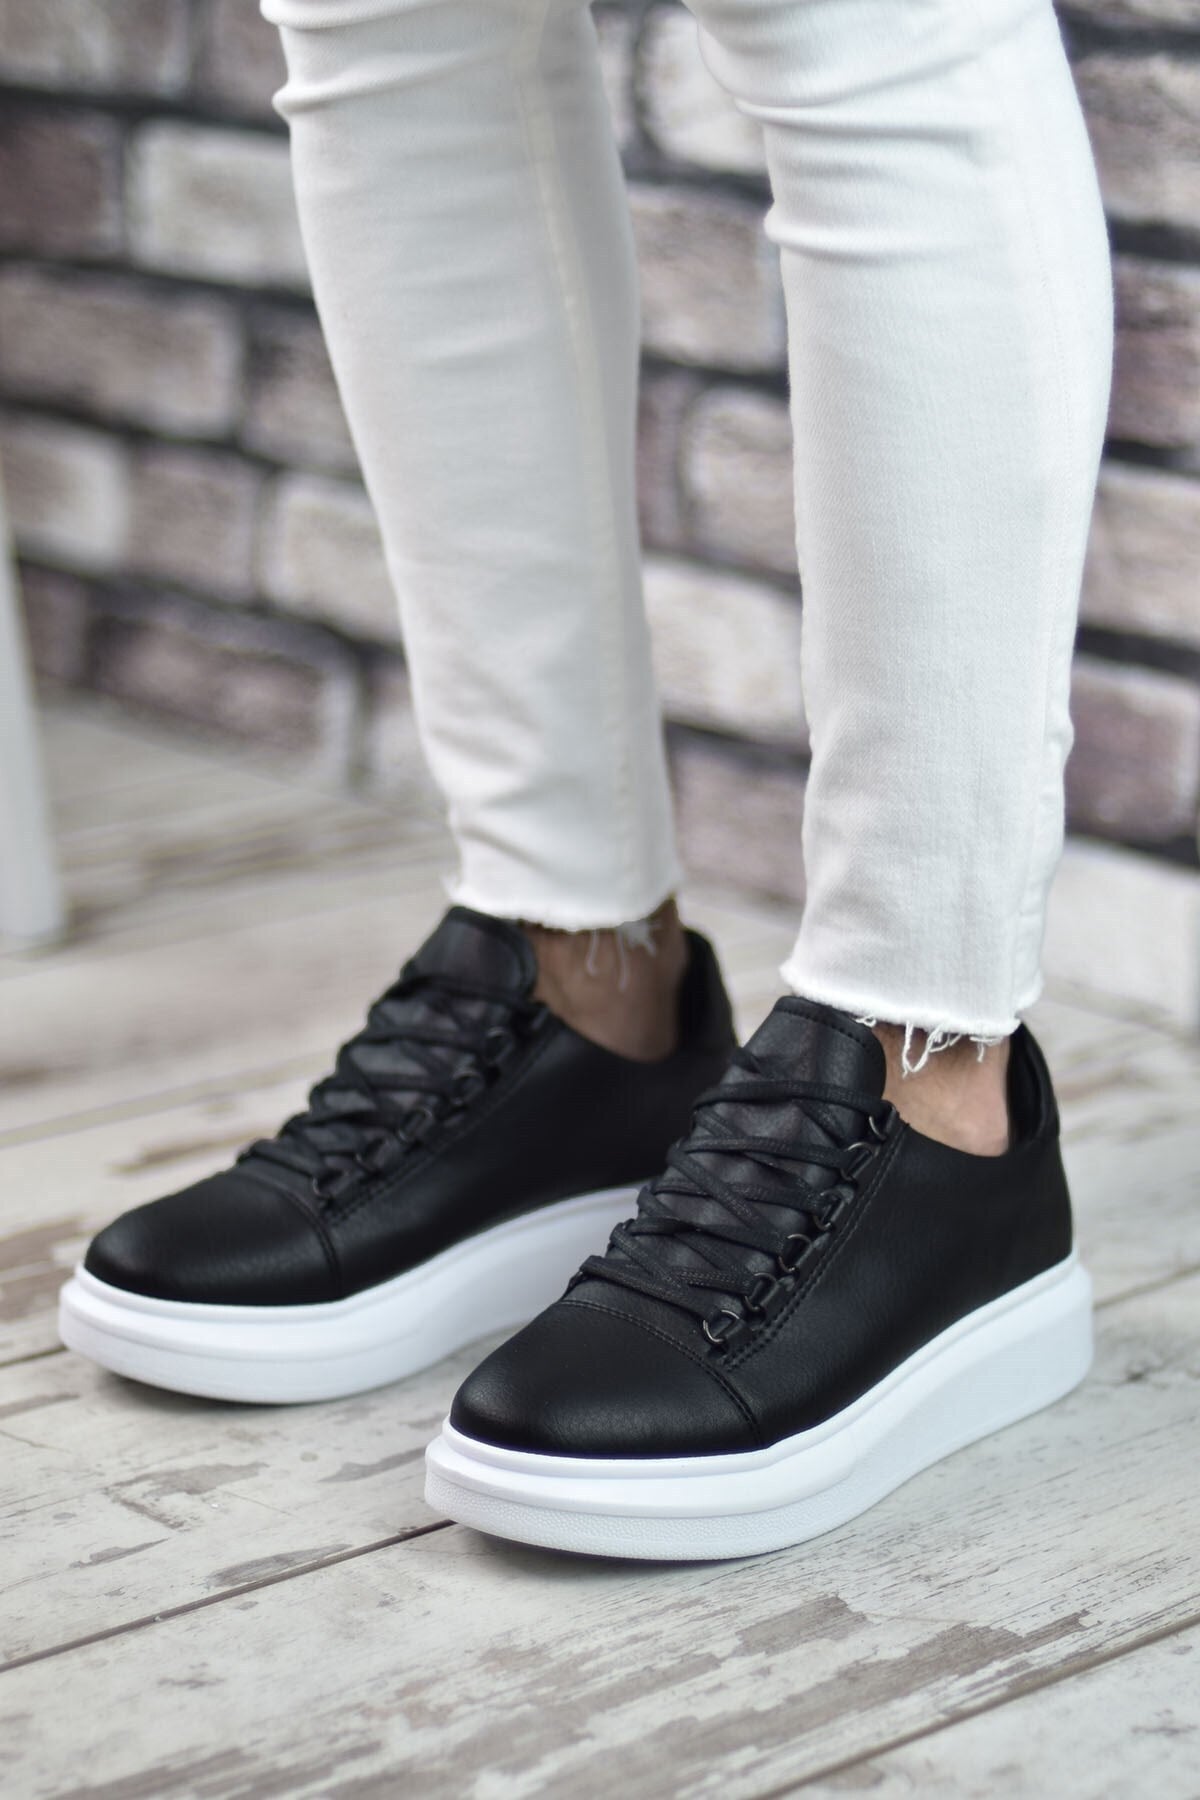 Black and white male sneaker